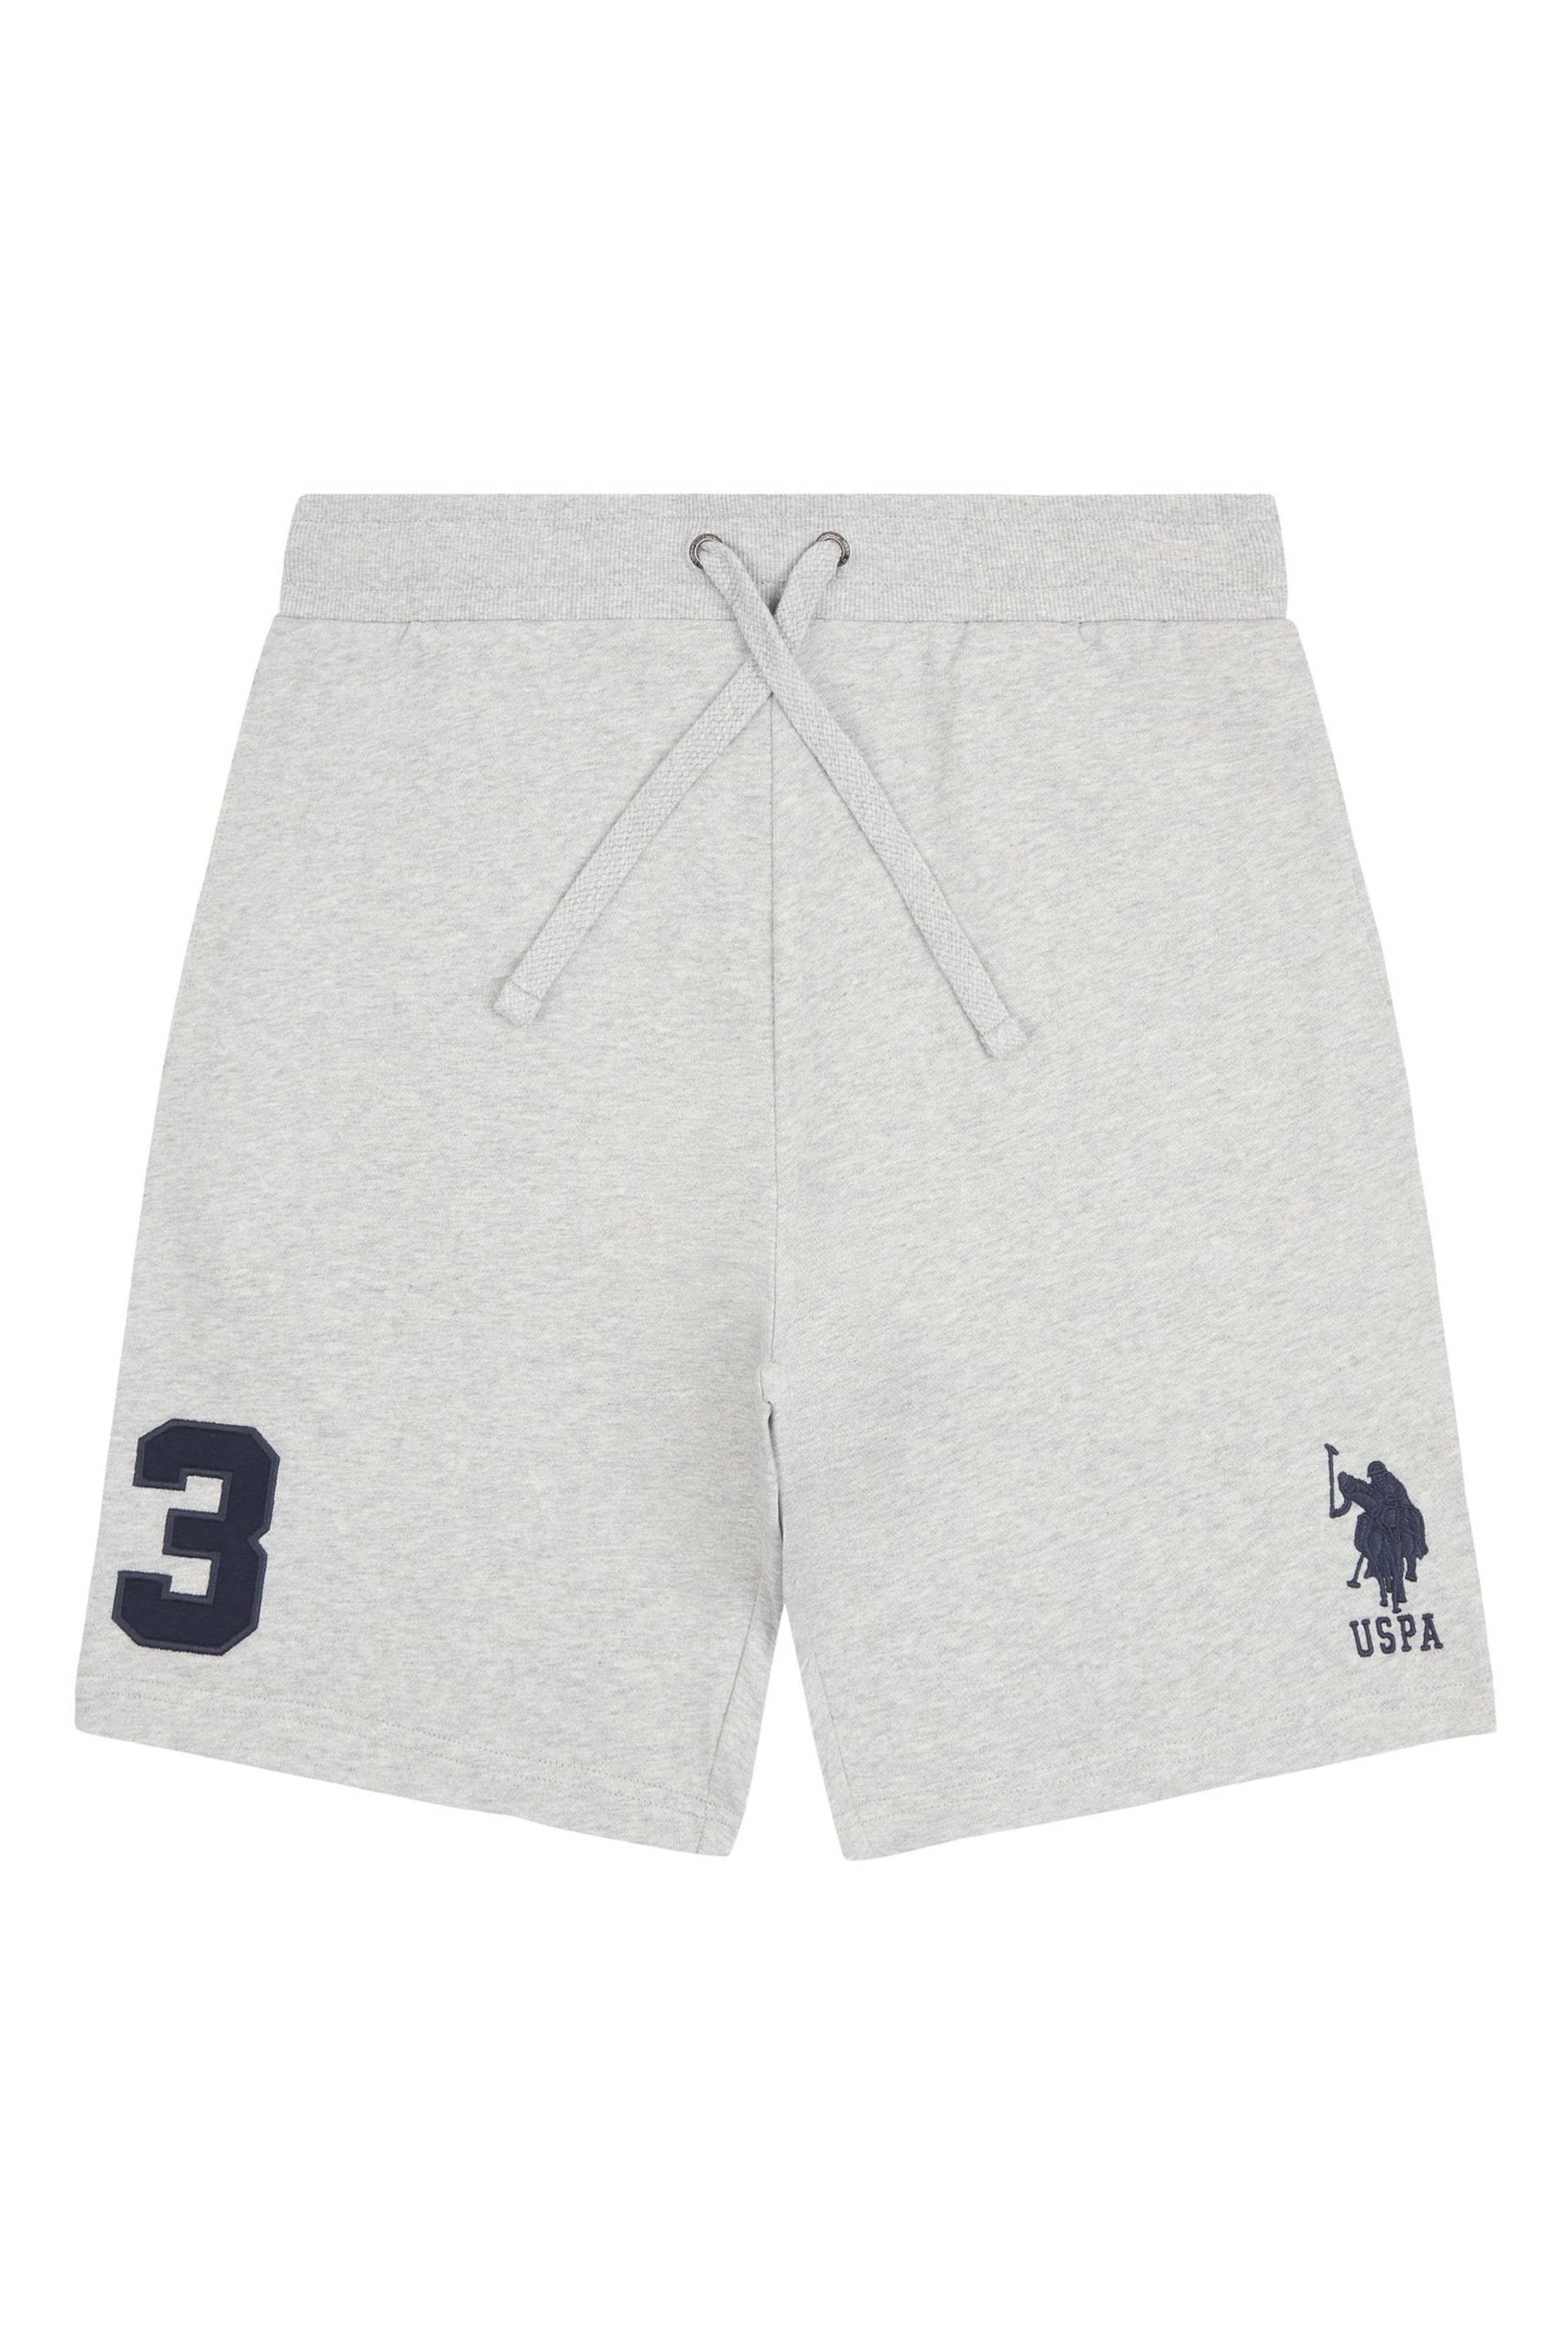 U.S. Polo Assn. Mens Classic Fit Player 3 Sweat Shorts - Image 7 of 9